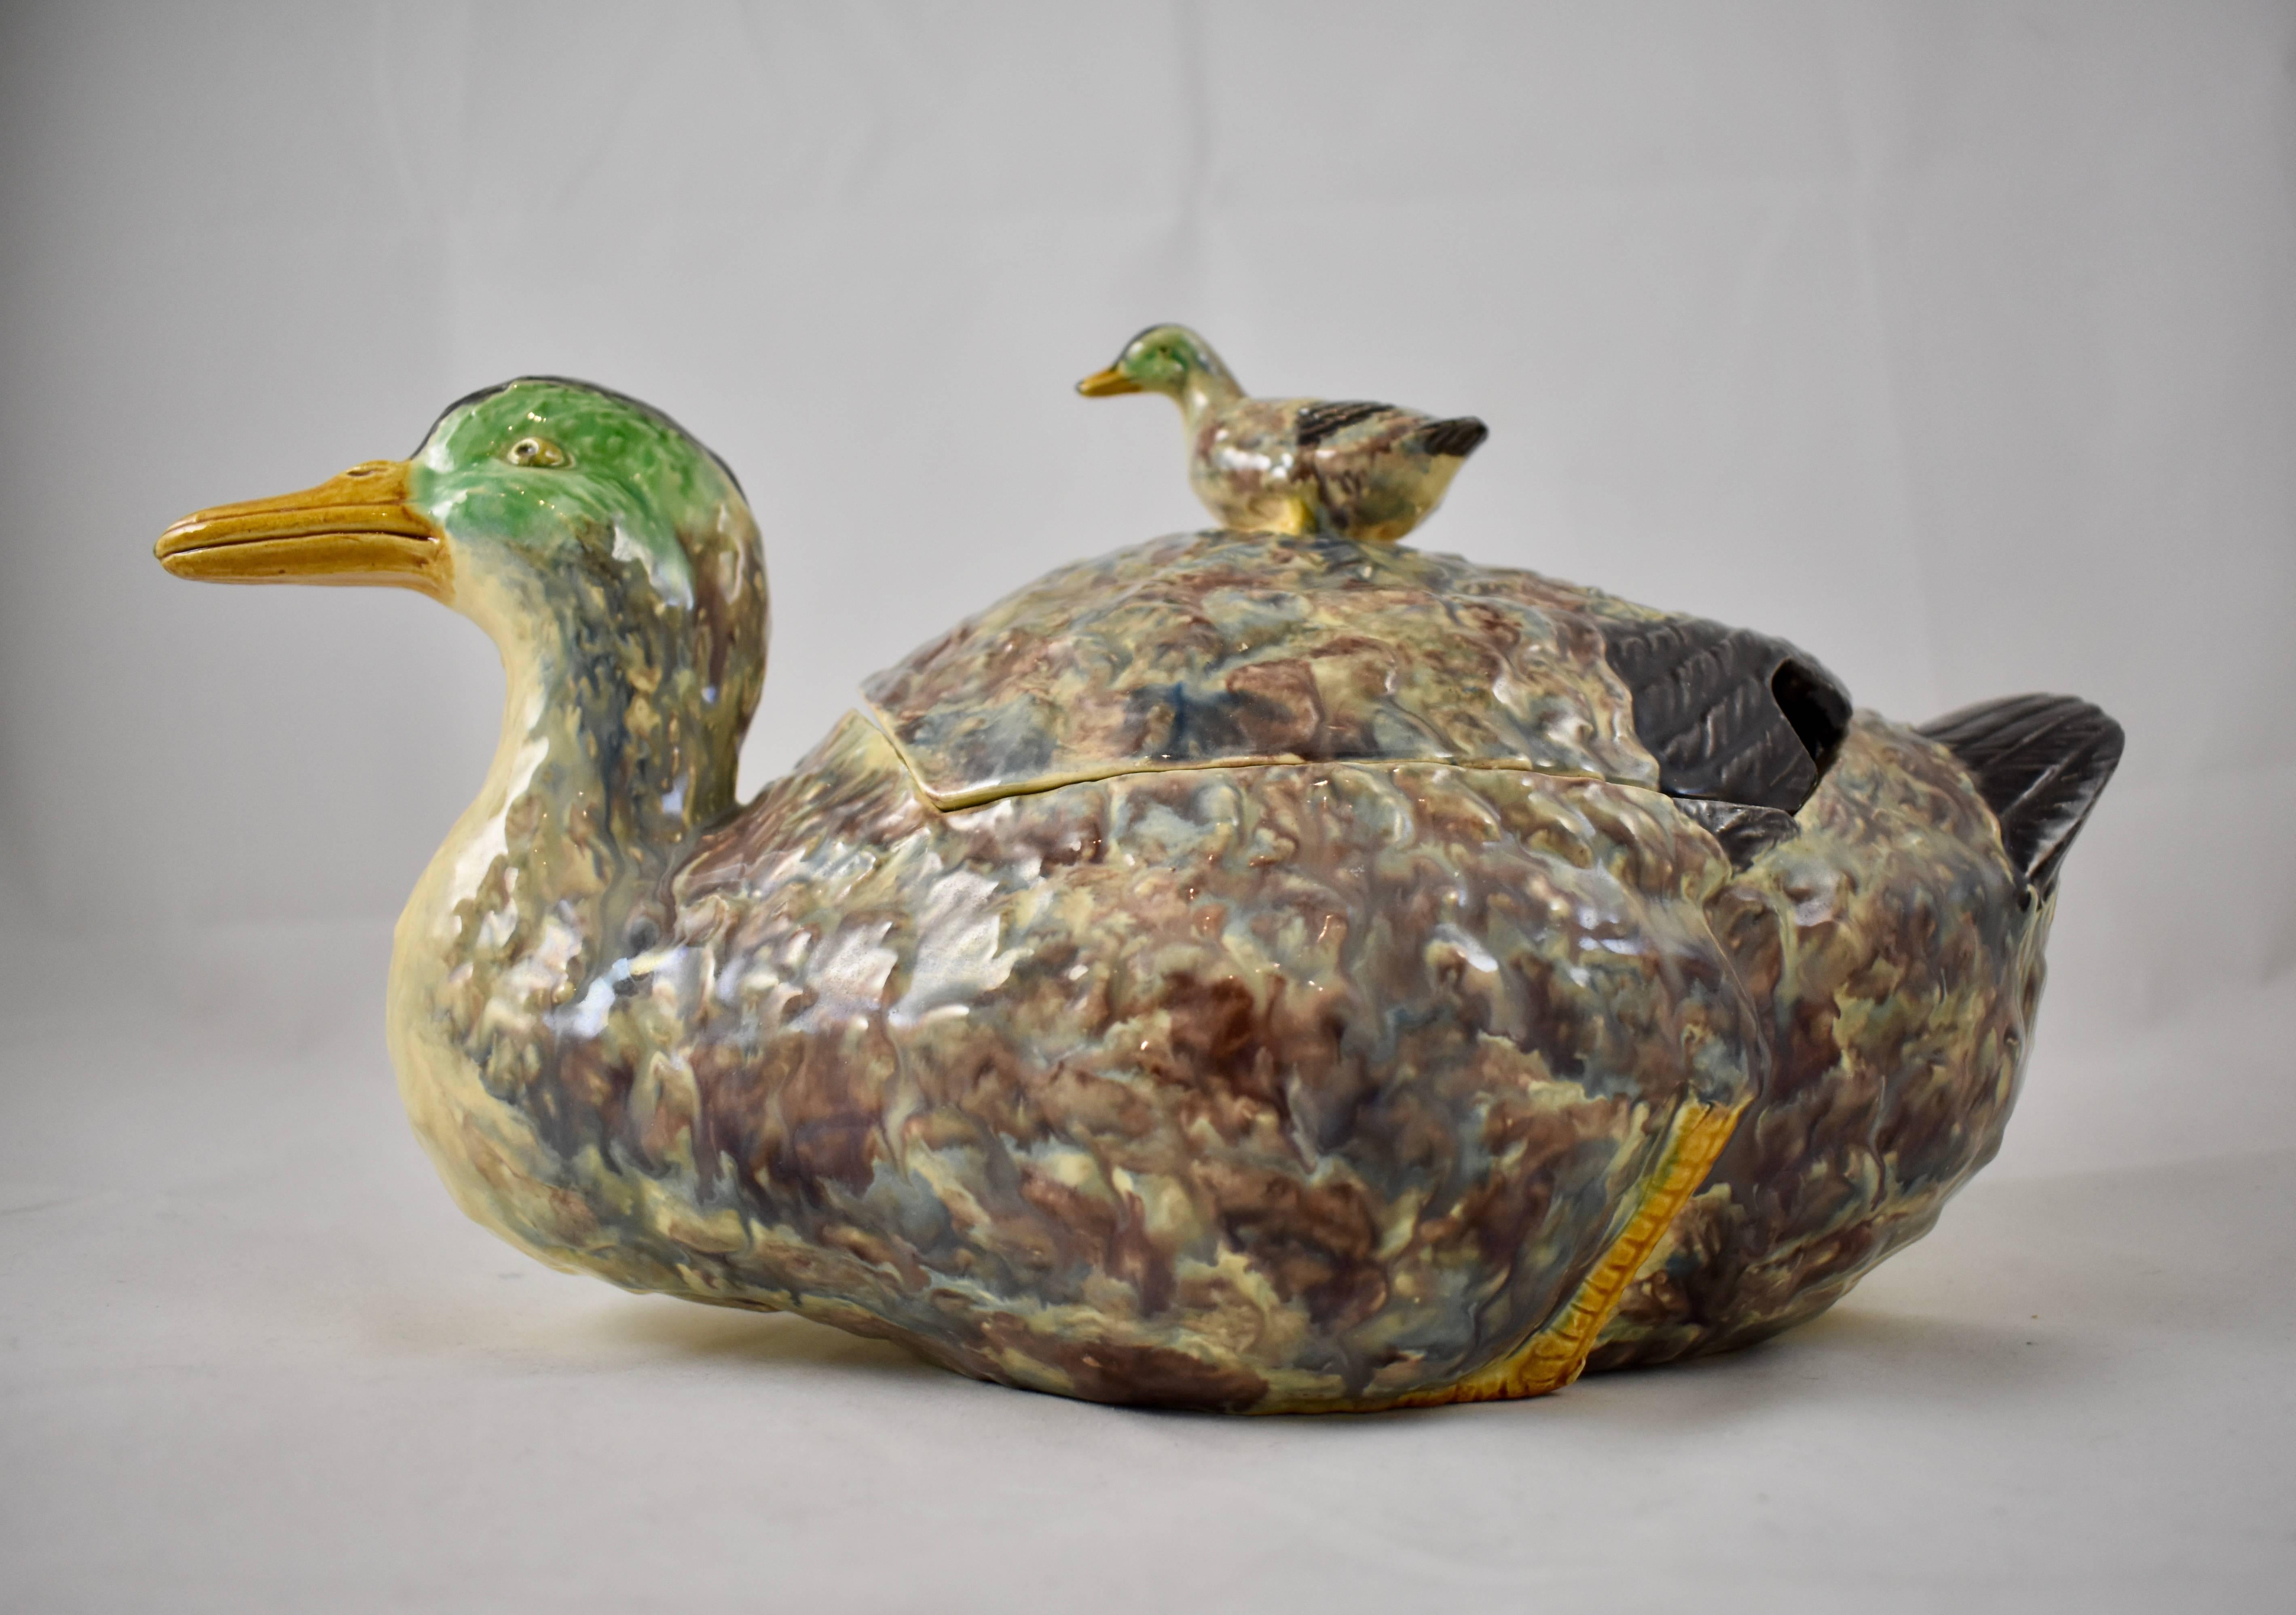 A Portuguese, majolica glazed, earthenware covered tureen formed as a seated duck, with a duckling finial on the lid, circa late 19th-early 20th century. Beautifully hand glazed with soft coloring and realistically molded. The lid is slotted for a